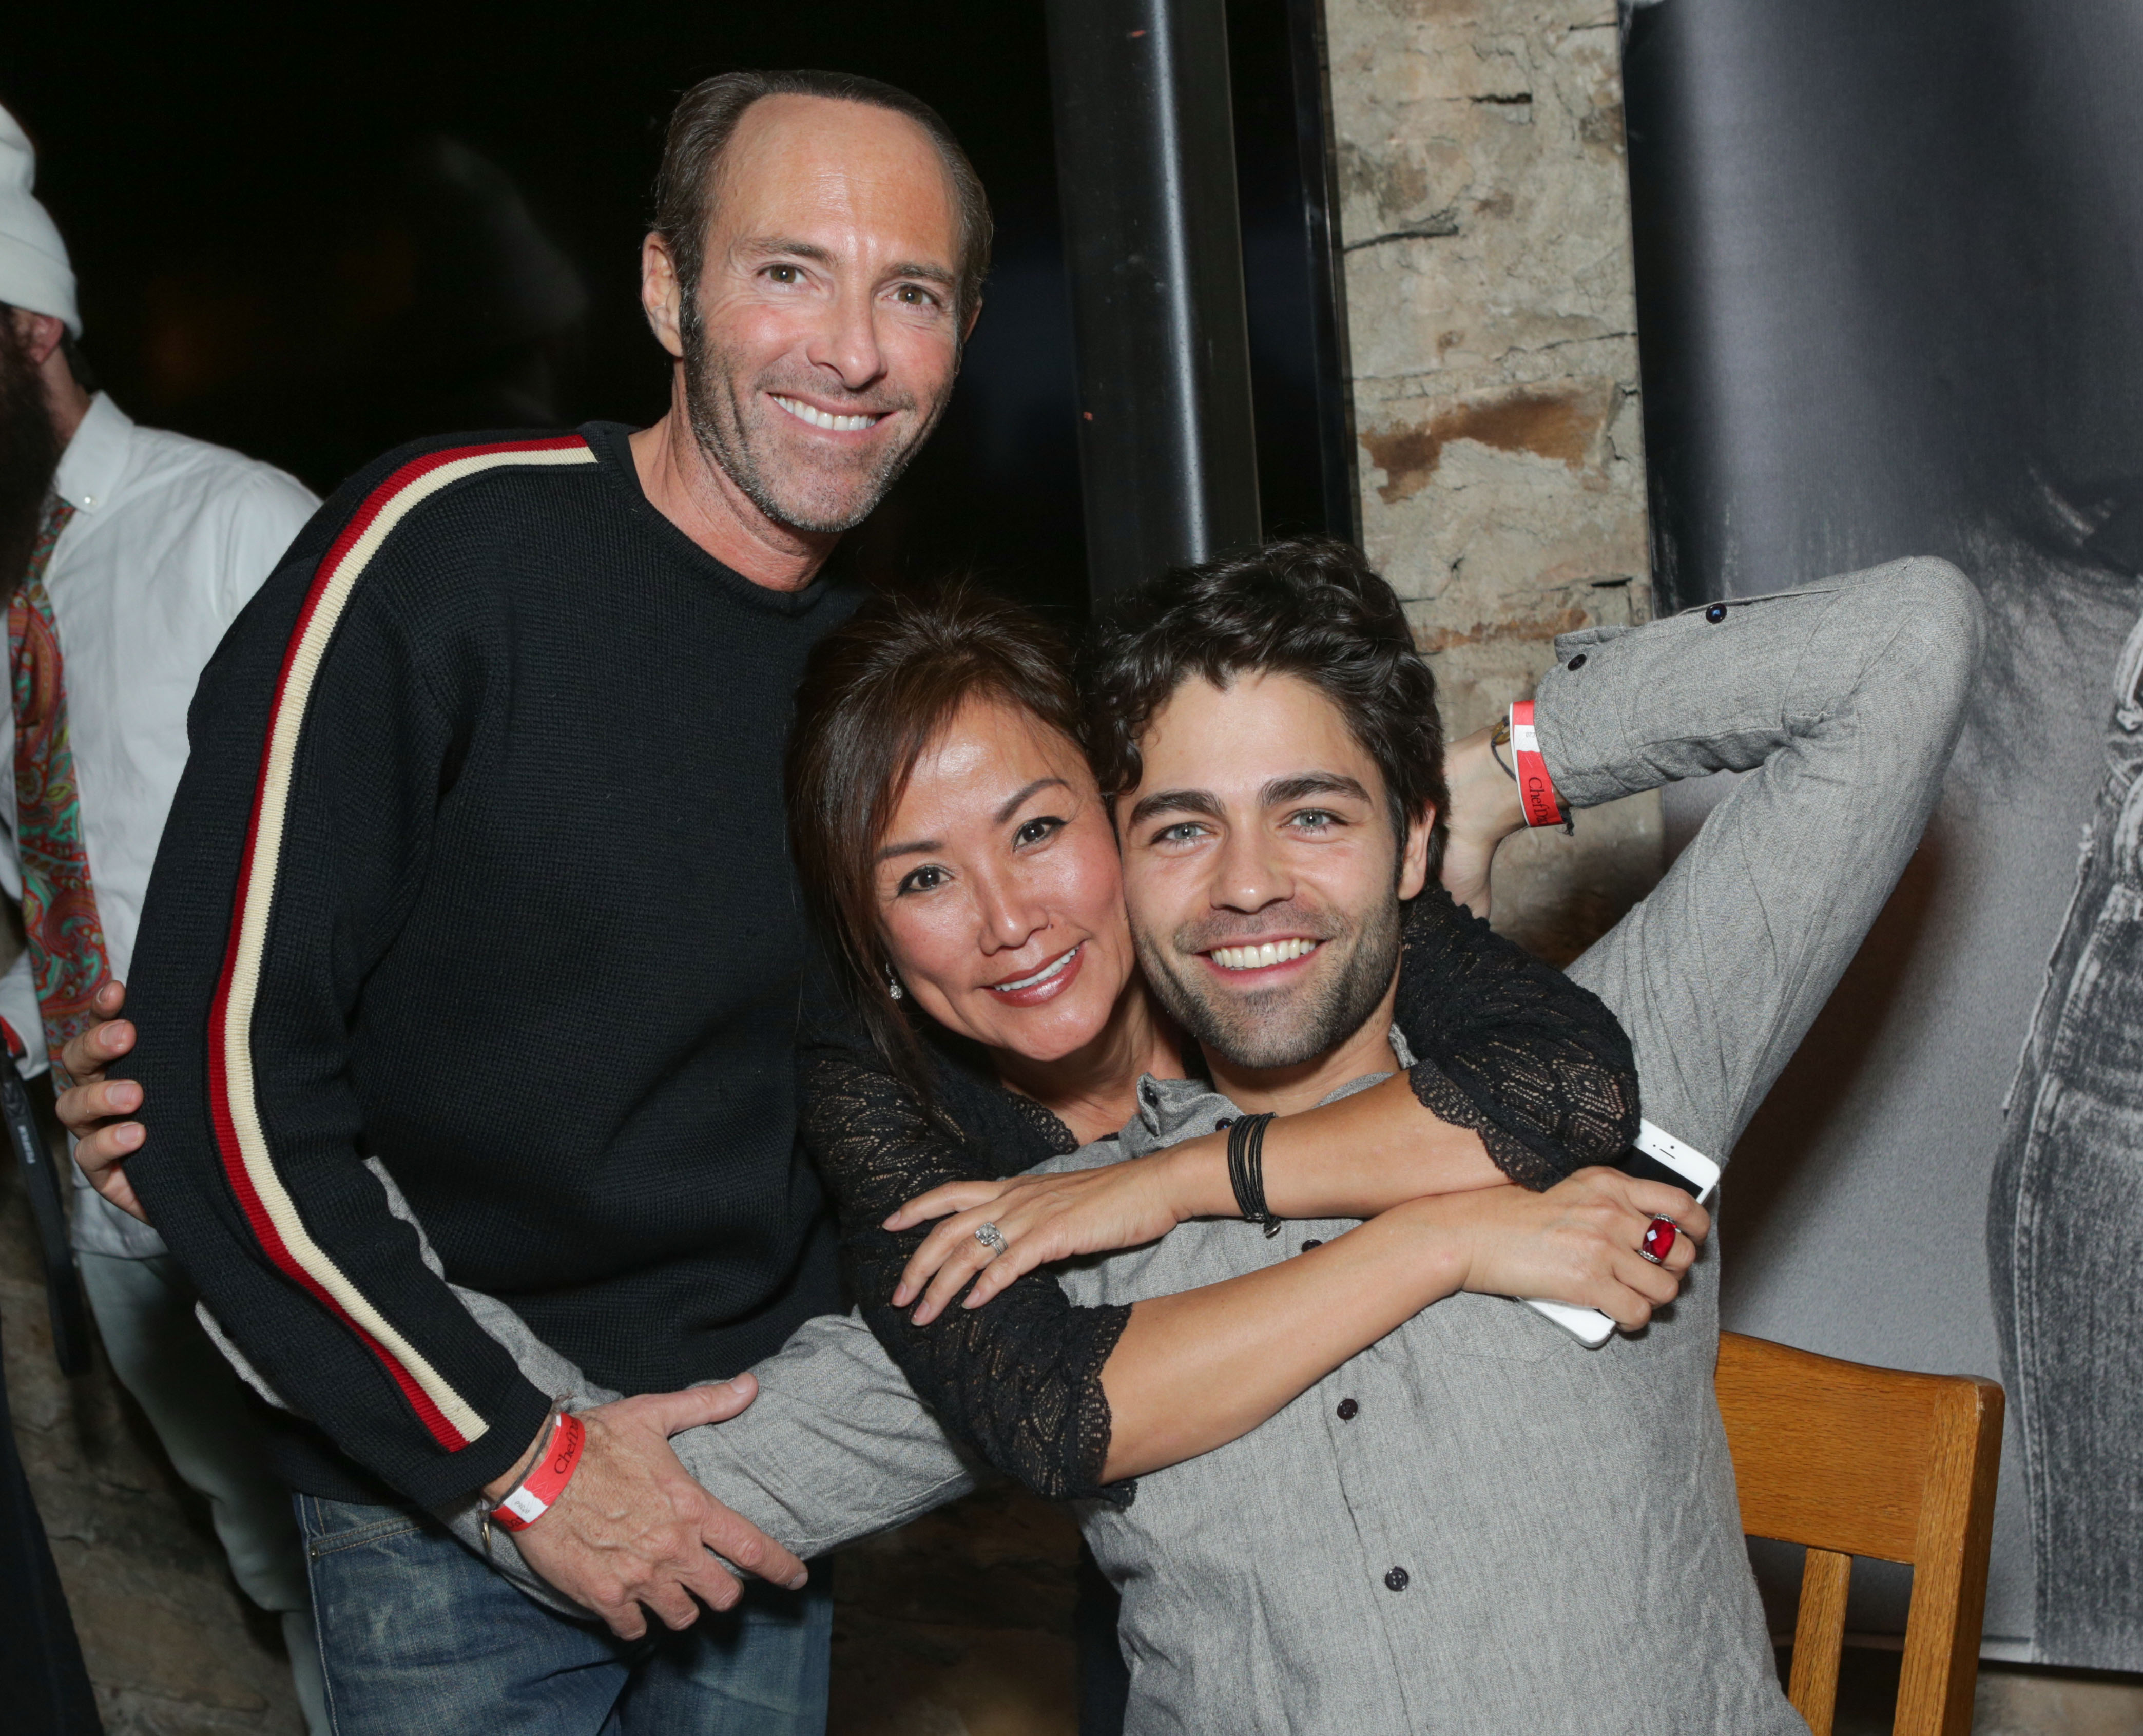 PARK CITY, UT - JANUARY 20: Producer Peter Glatzer, founder of ChefDance Mimi Kim and actor Adrian Grenier attend ChefDance Sponsored by SUJA Juices, El Tesoro Tequila & Sunrider on January 20, 2014 in Park City, Utah.  (Photo by Tiffany Rose/Getty Images for ChefDance)